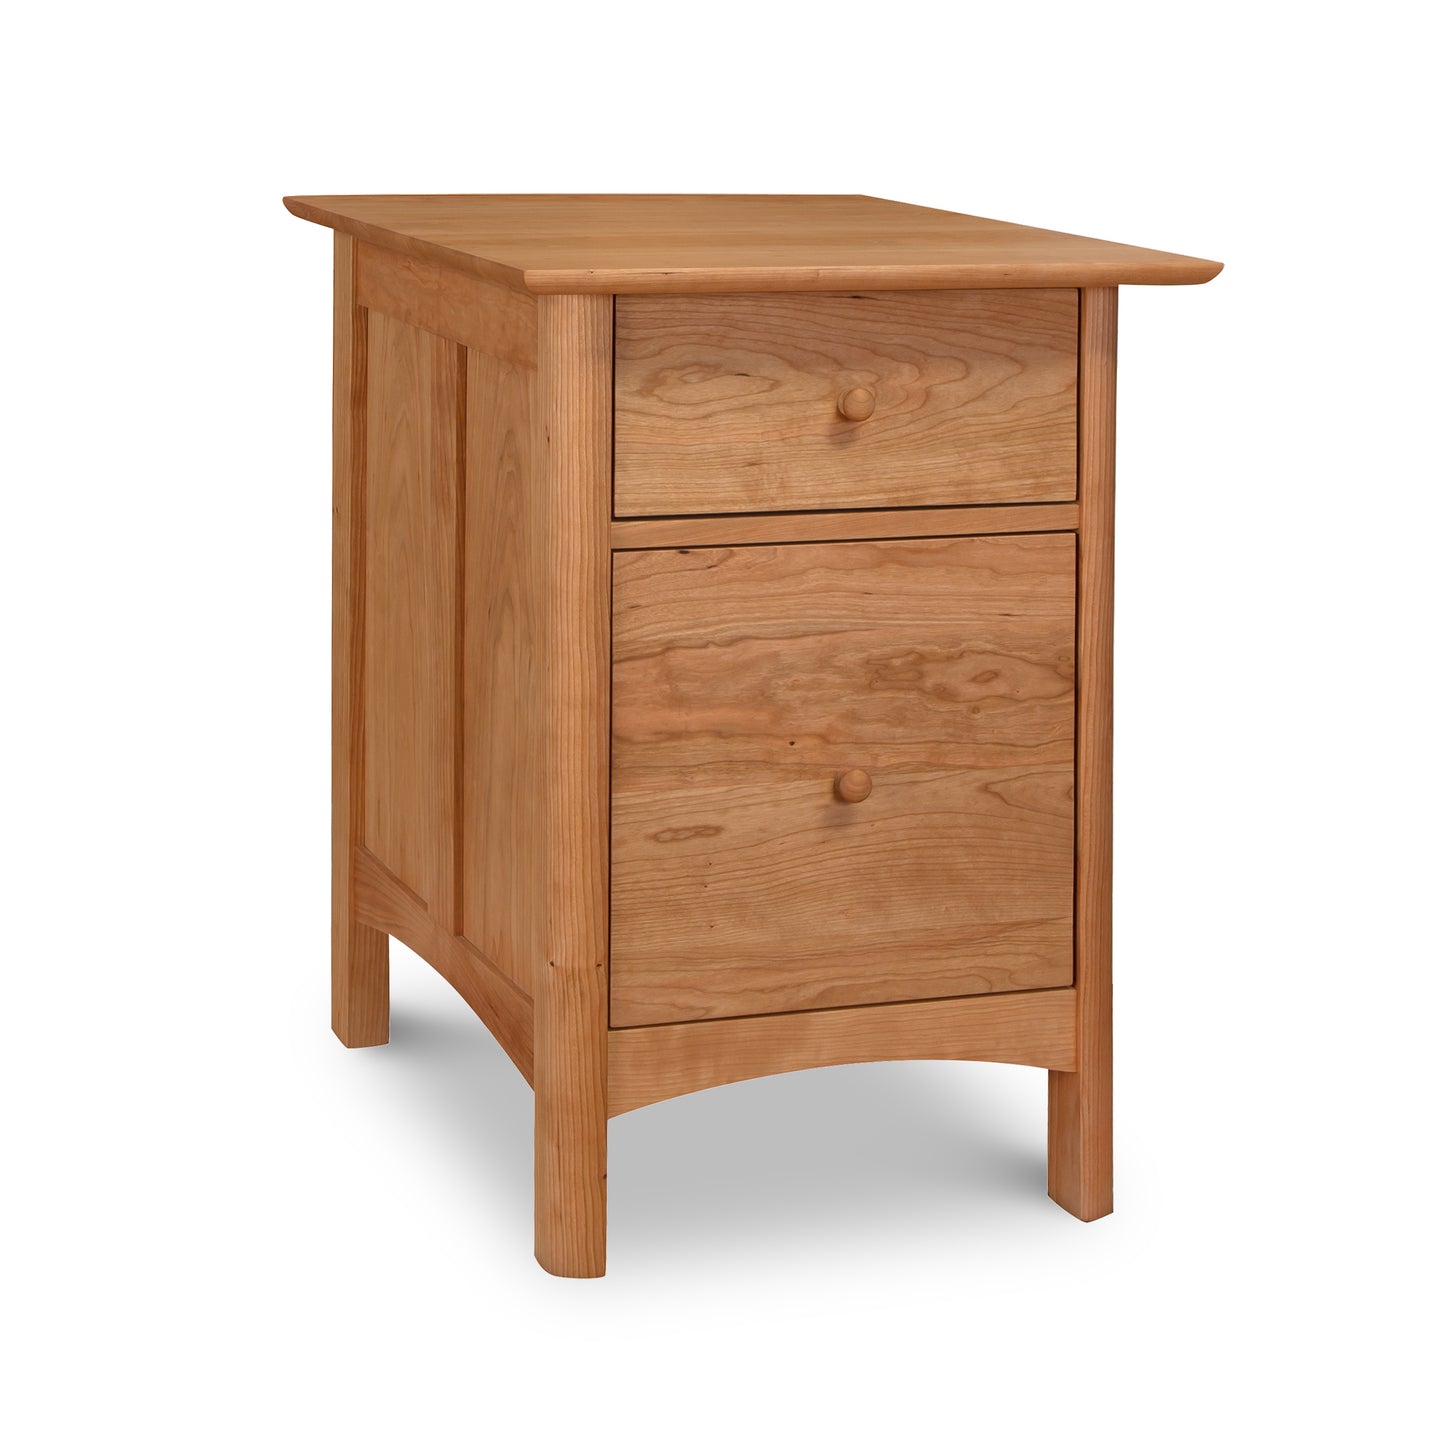 Heartwood Shaker Vertical File Cabinet crafted from sustainably harvested North American hardwoods, on a white background, by Vermont Furniture Designs.